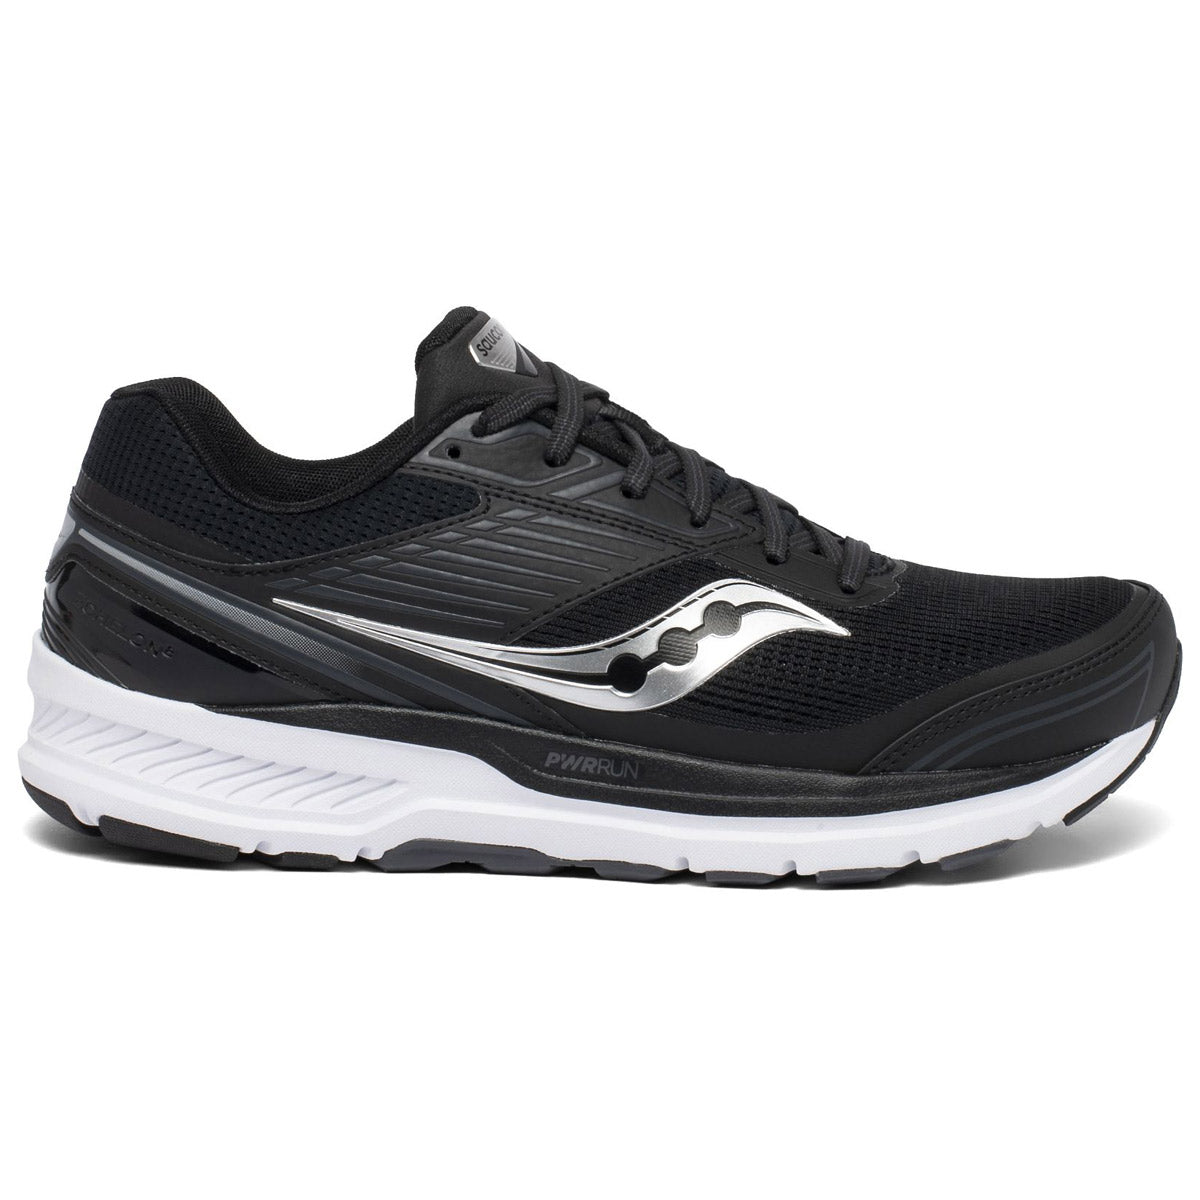 Black and white Saucony Echelon 8 running shoe with PWRRUN midsole, cushioned sole, and logo on the side.